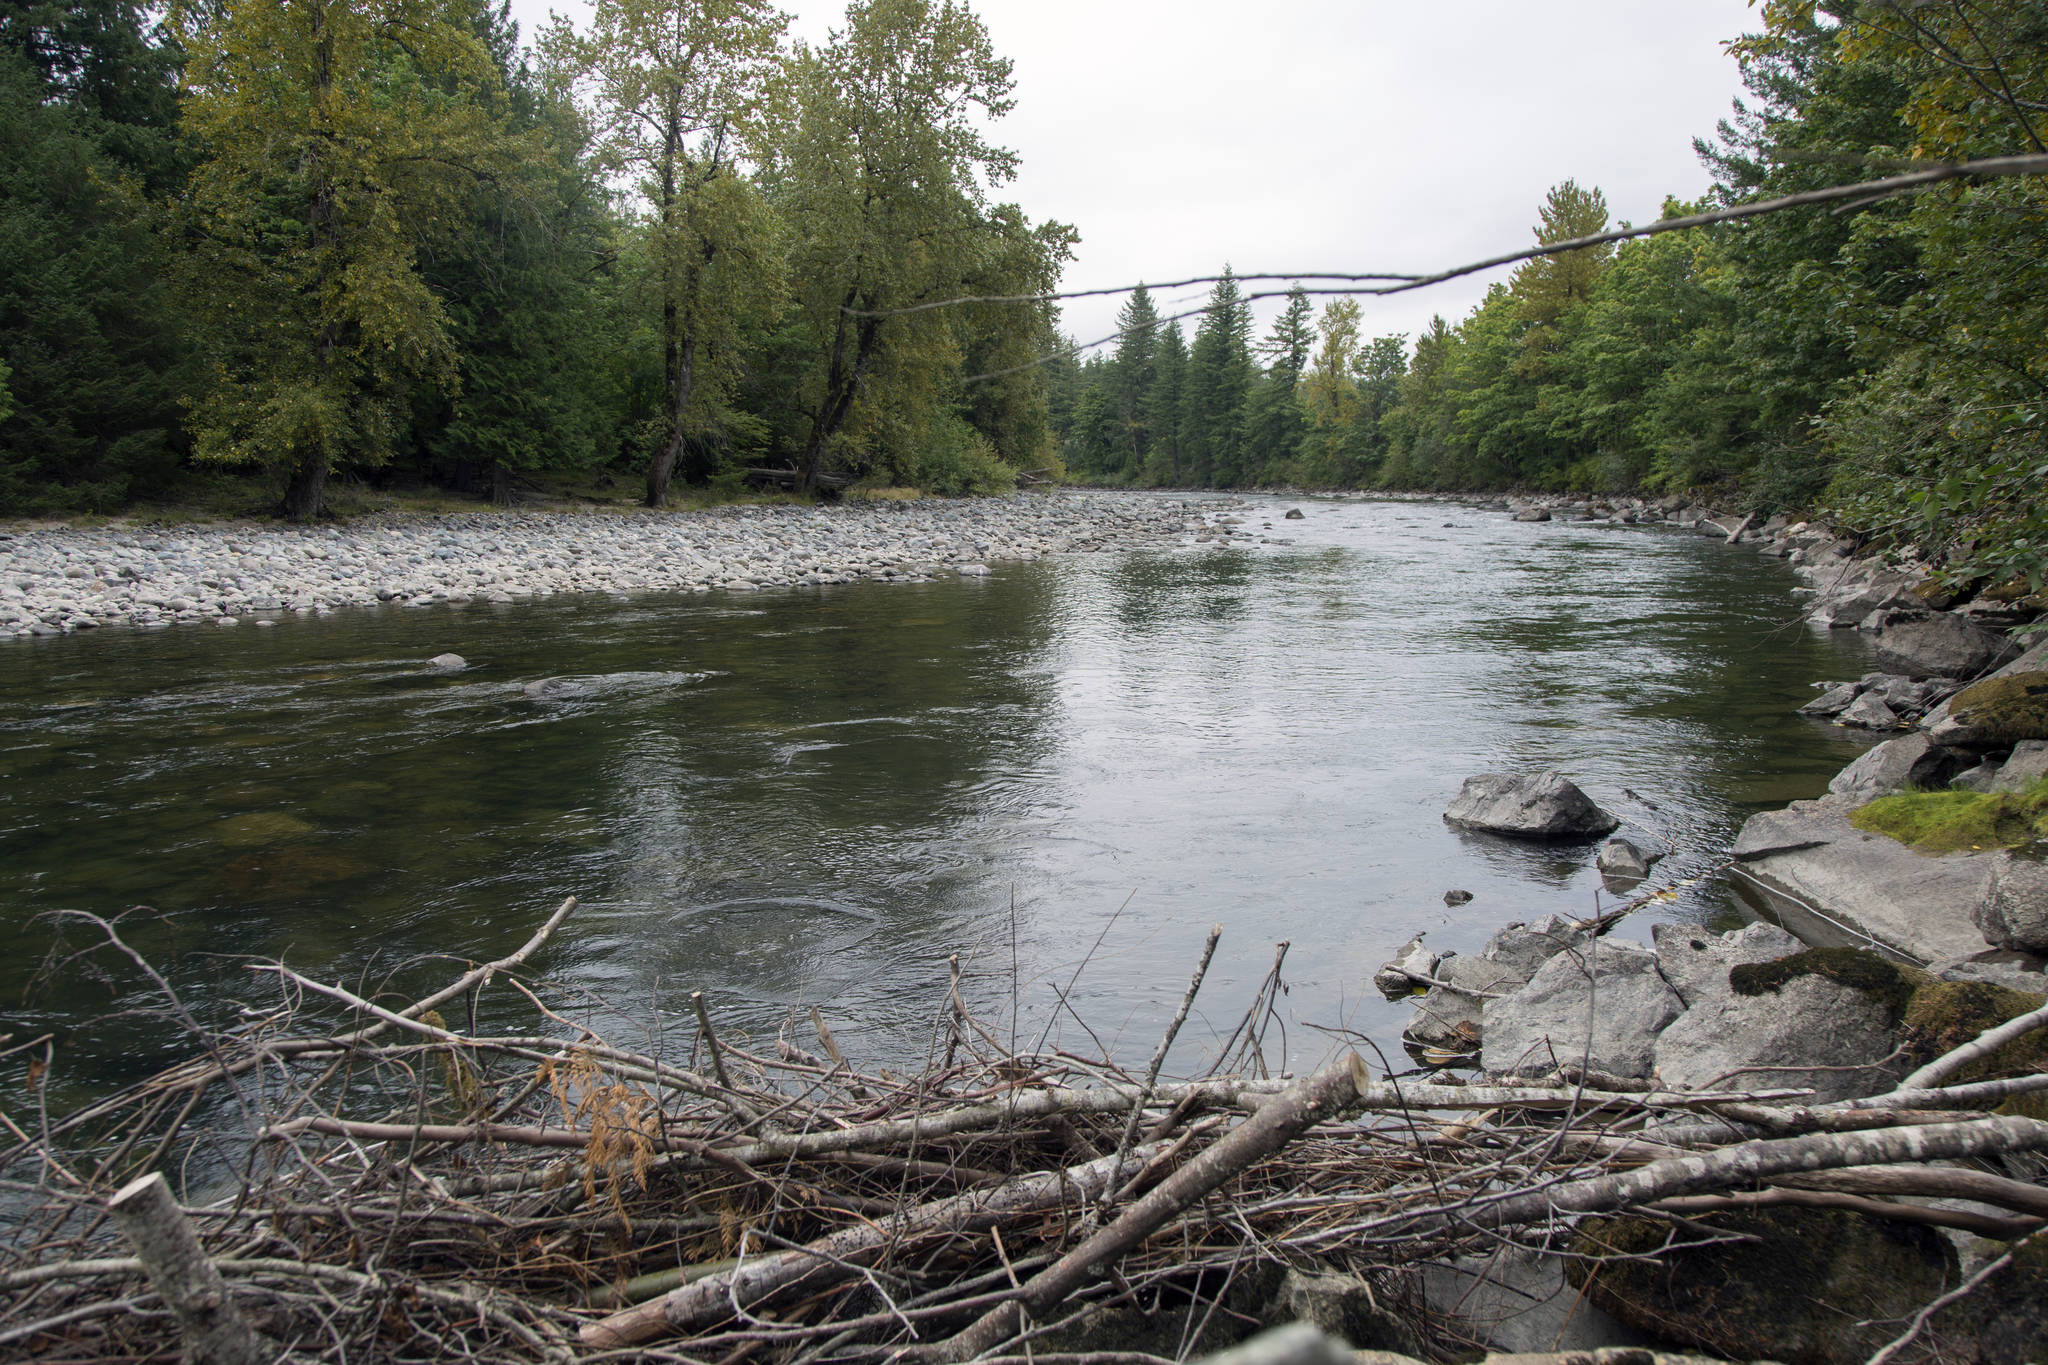 North Bend failed to properly mitigate water for six weeks